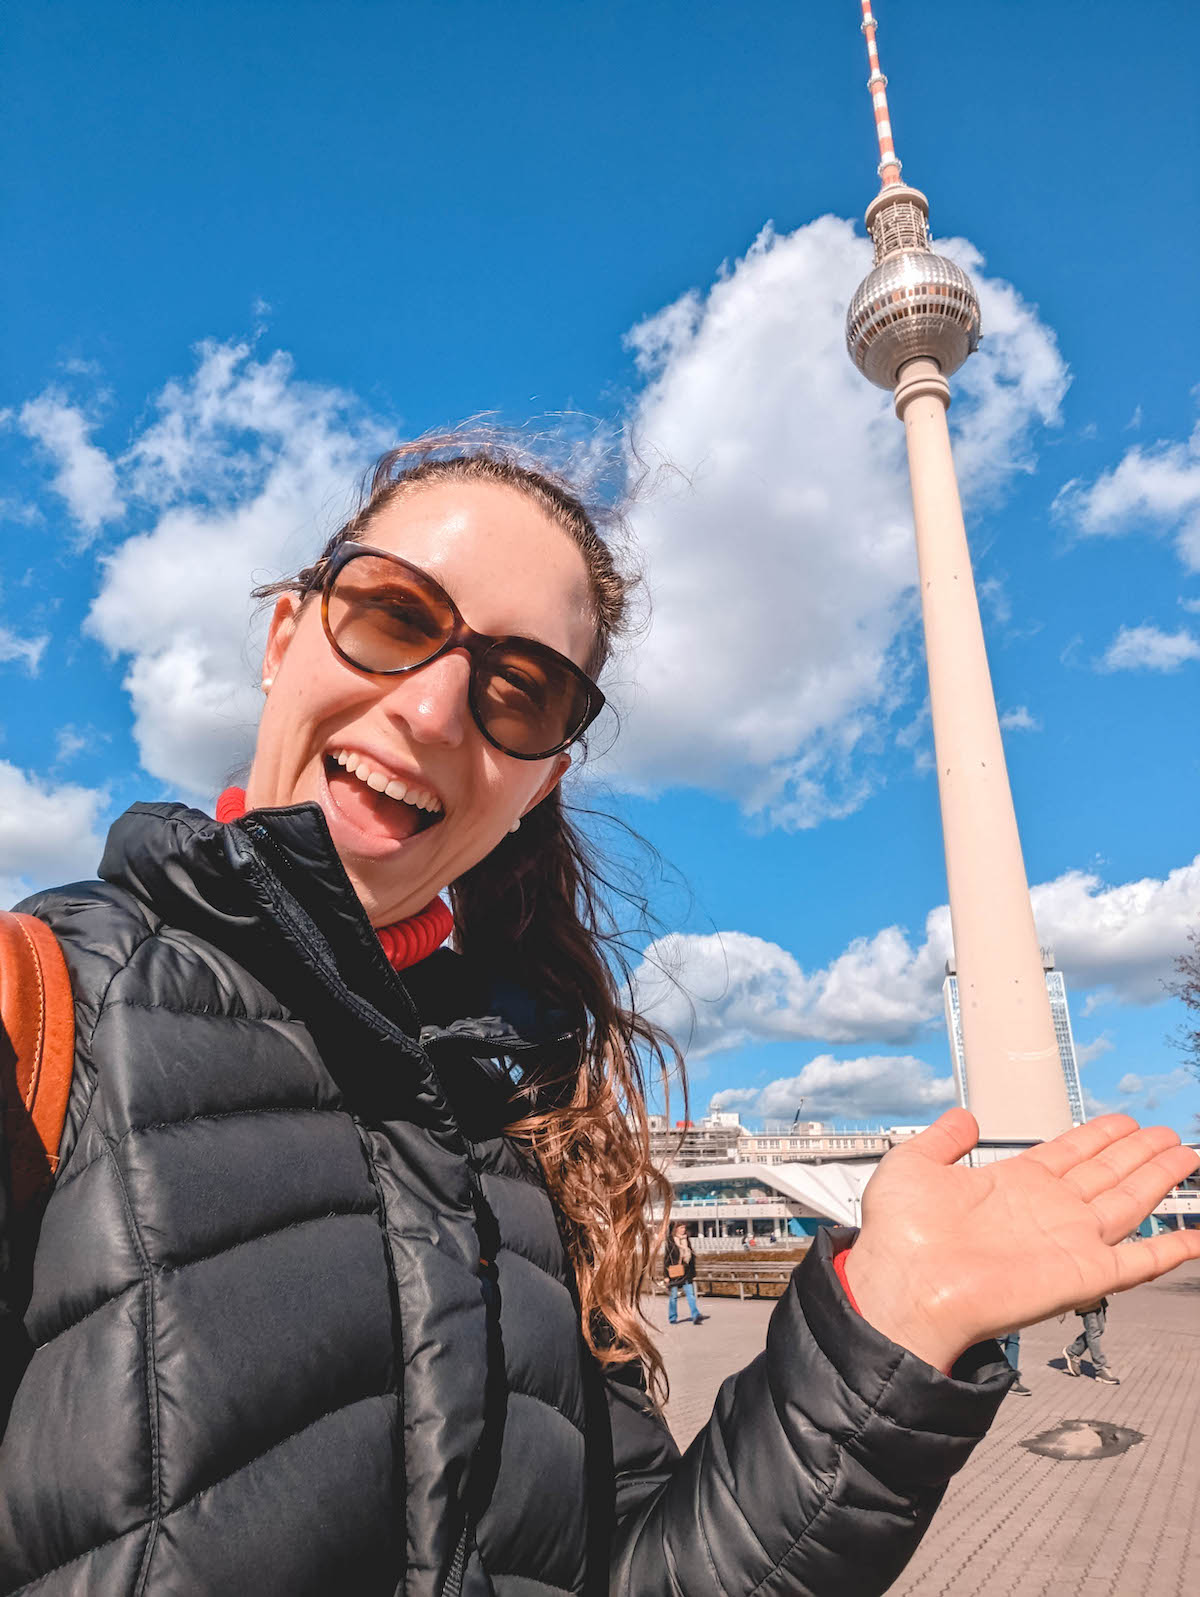 A woman smiling in front of Berlin's TV tower